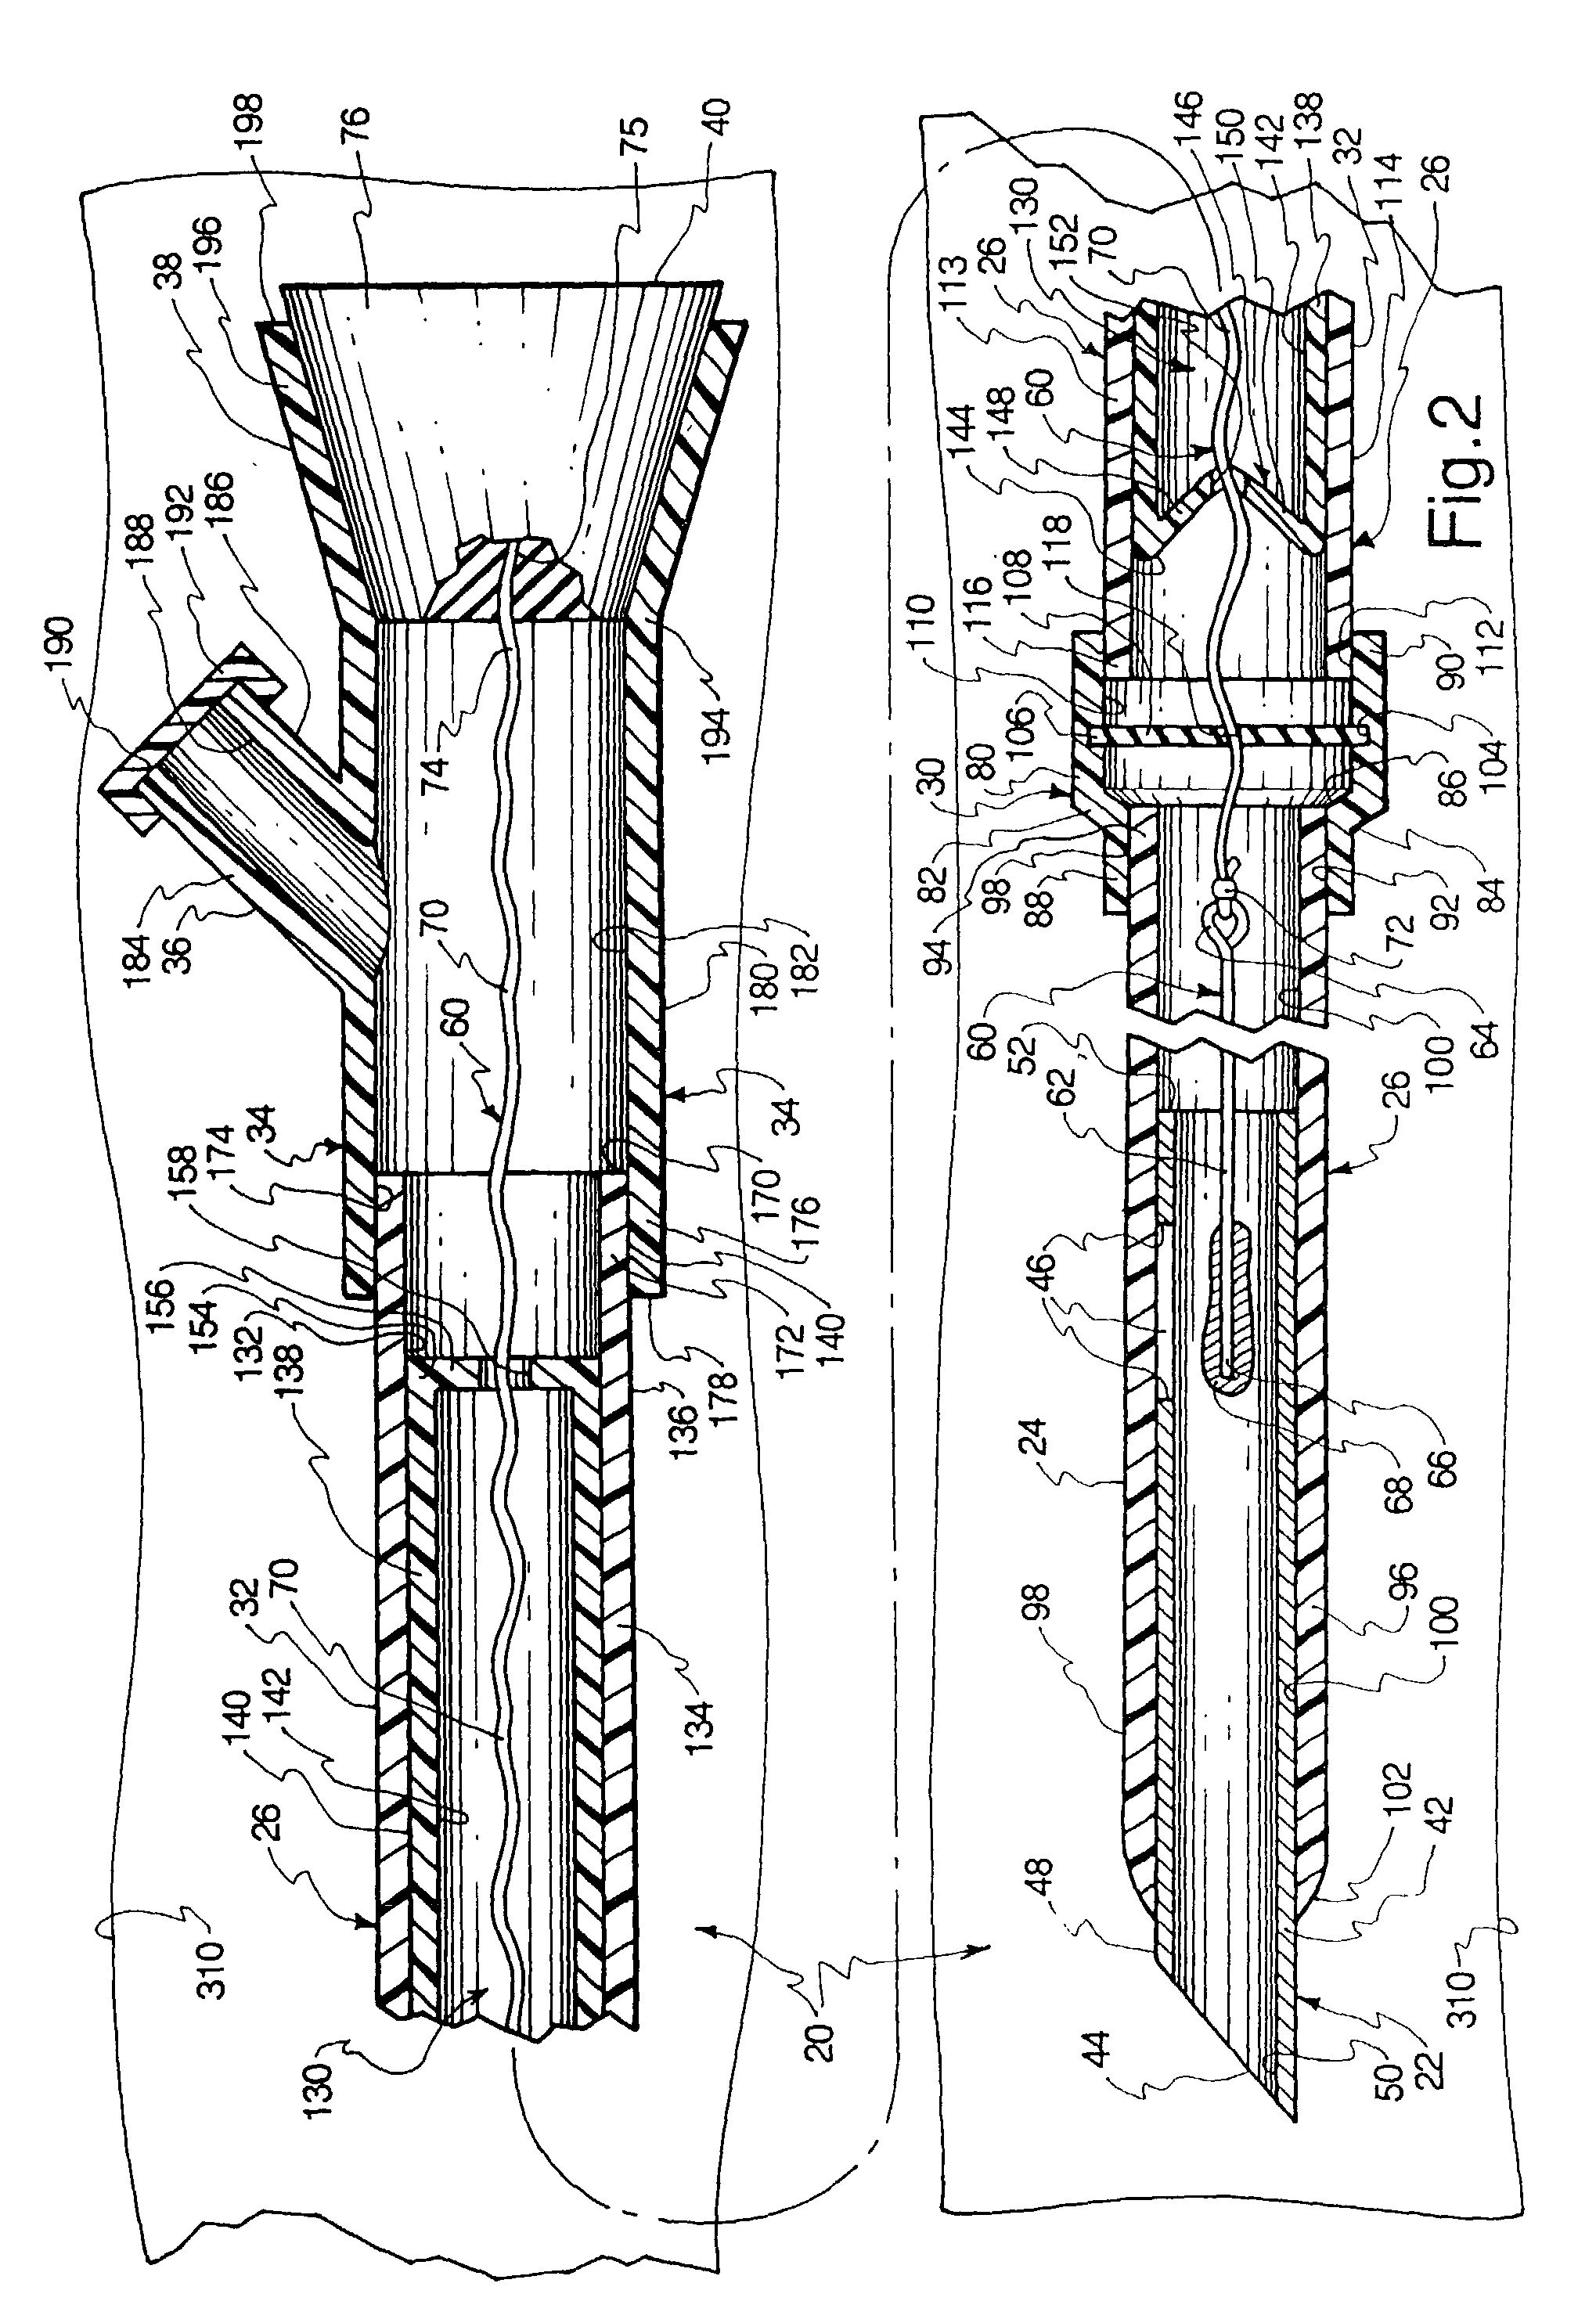 Trapping of intravenous needle associated with a long catheter, and related methods